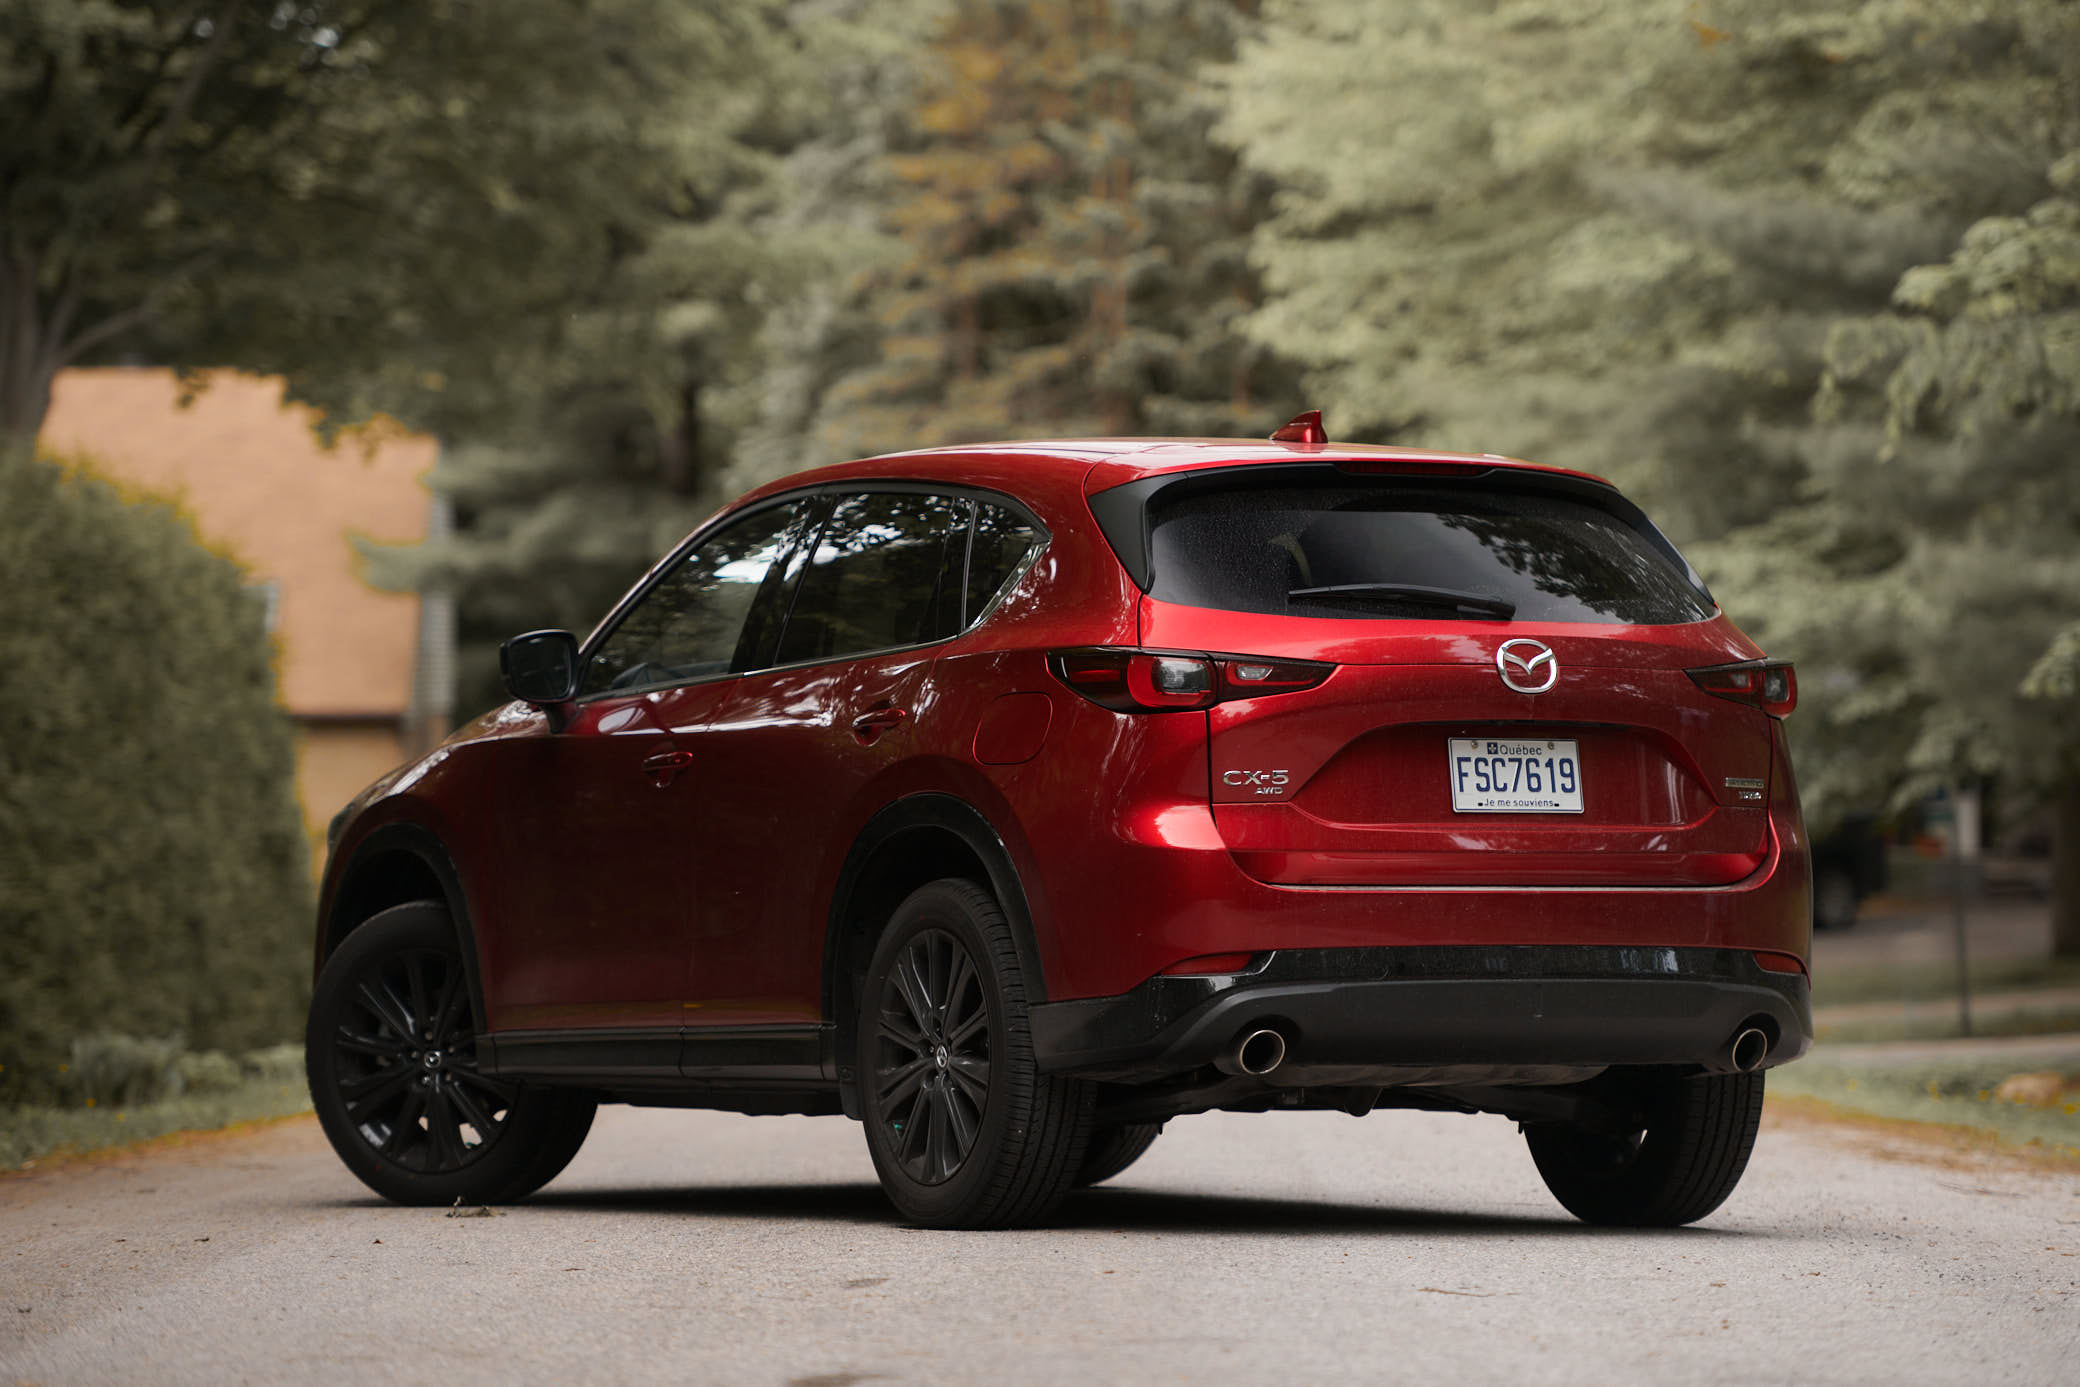 2022 Mazda CX-5 Is Still Up There Among My Favorite Compact SUVs